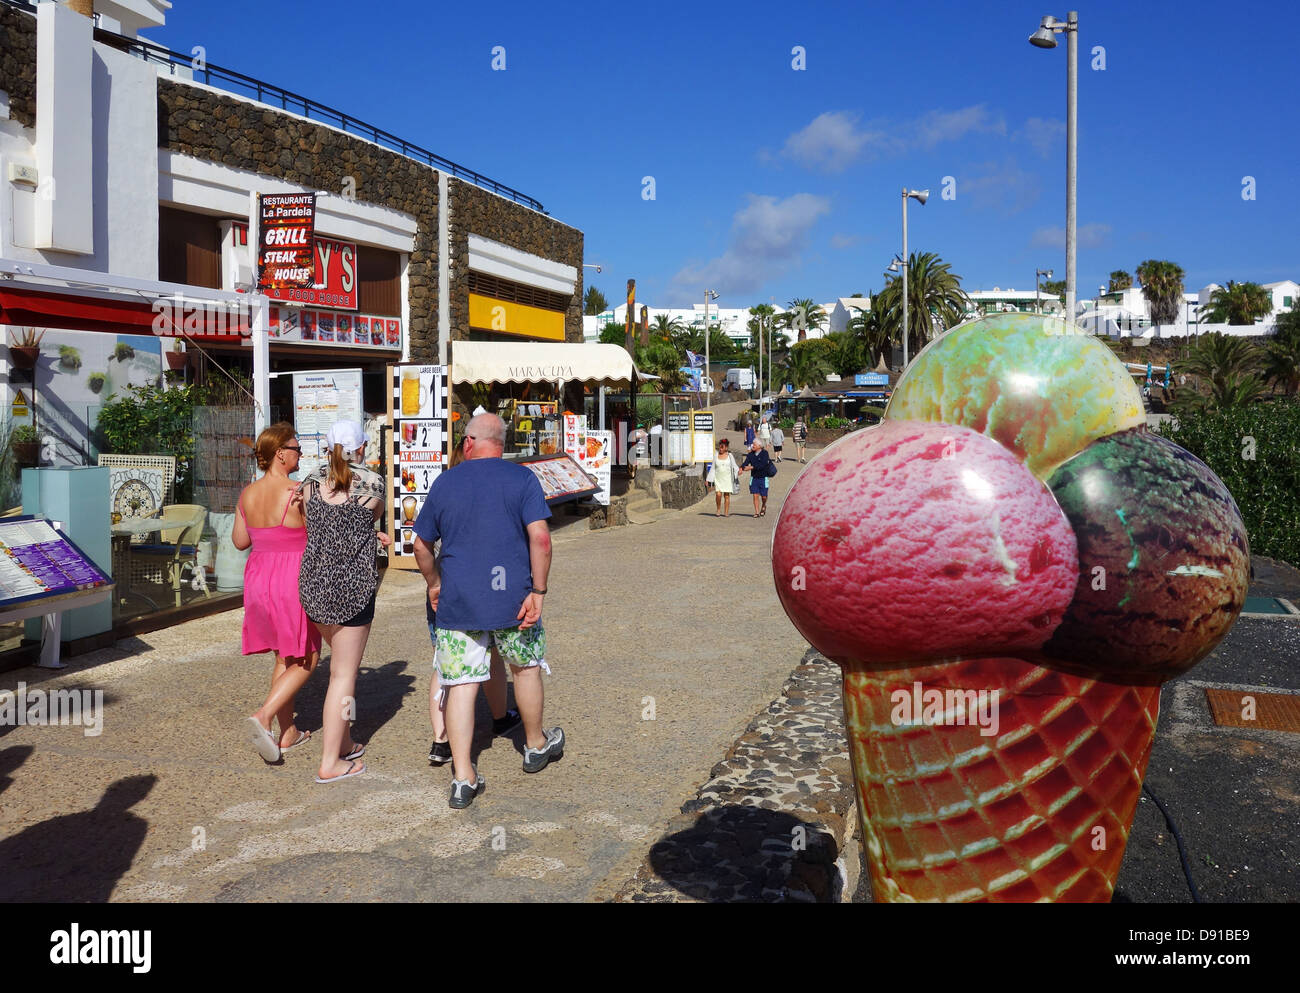 Beachfront shops and cafes by the beach of Playa de las Cucharas, Costa Teguise, Lanzarote, Canary Islands Stock Photo